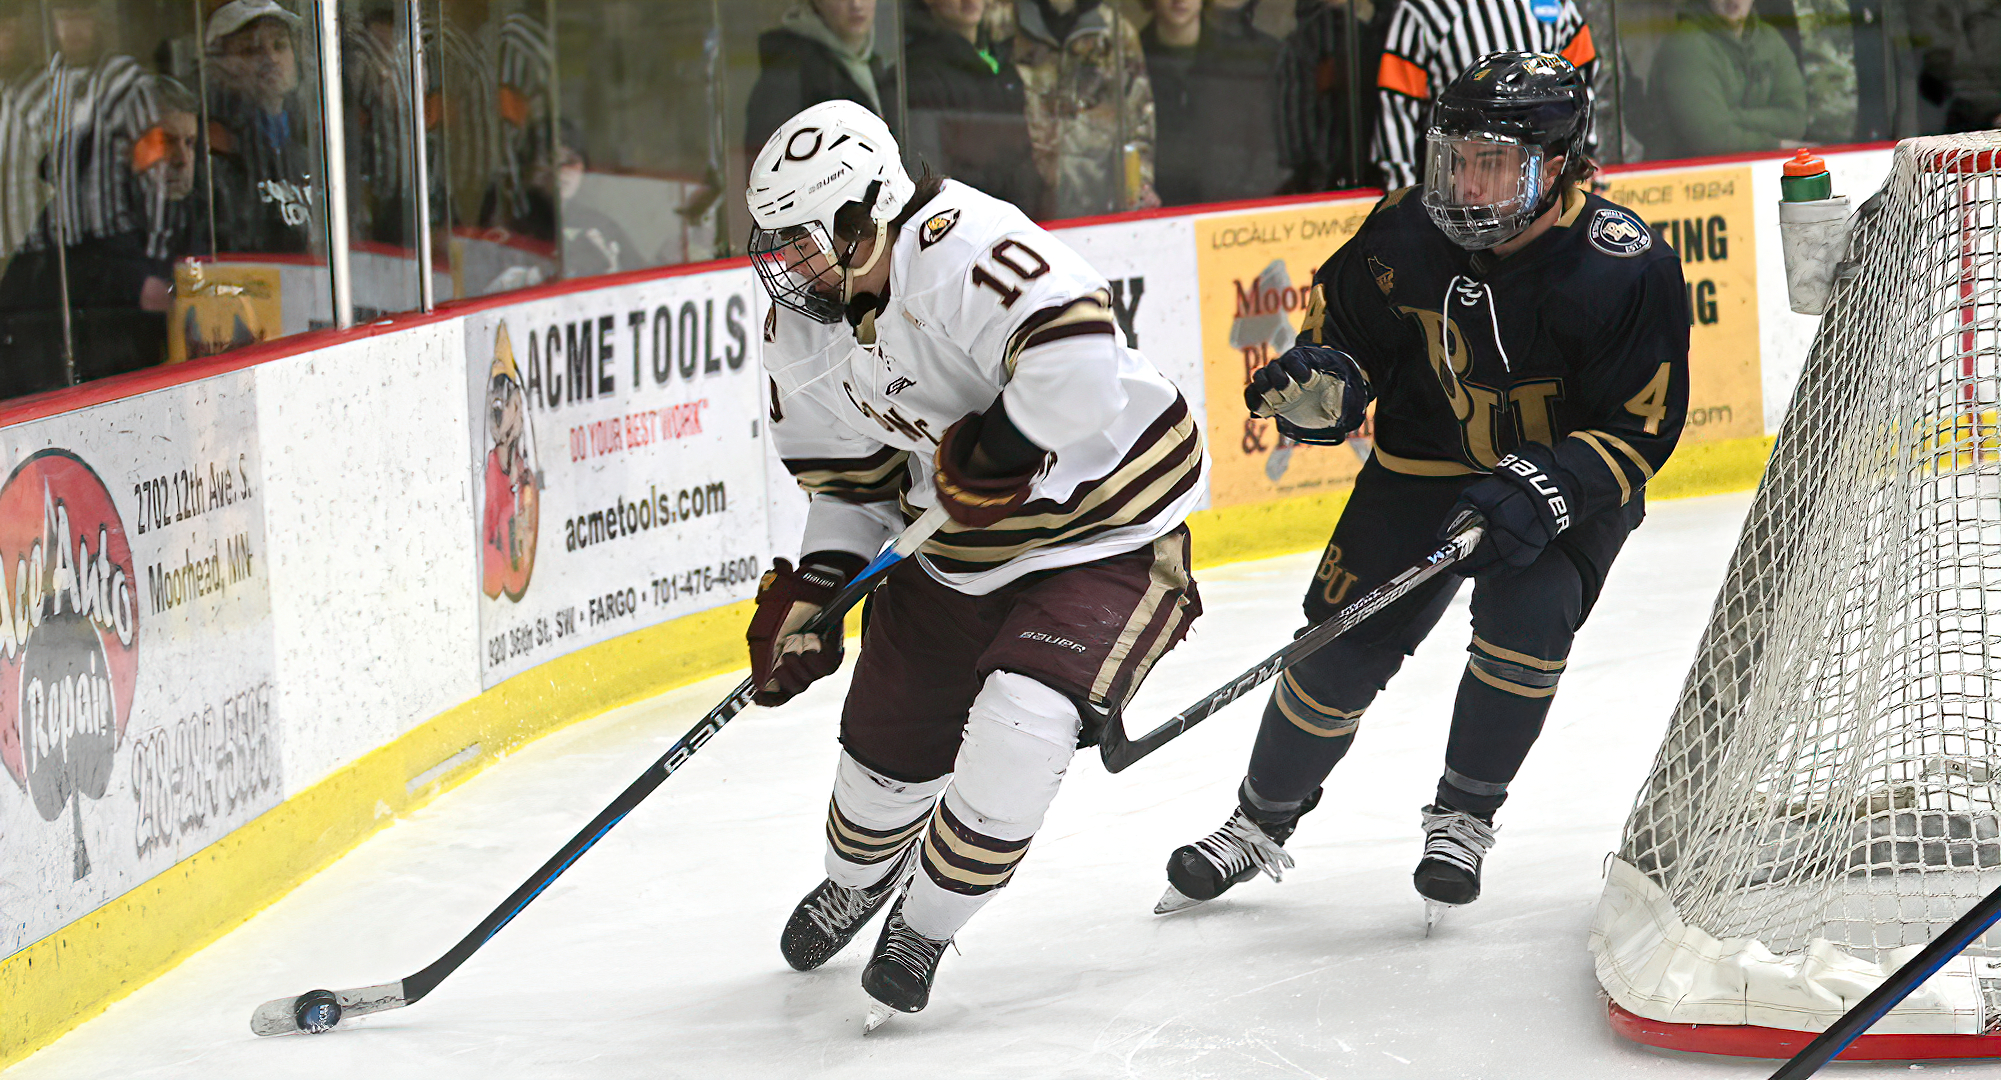 Hunter Olson was one of three Cobber players who had four shots on goal in Concordia's series finale with Bethel.